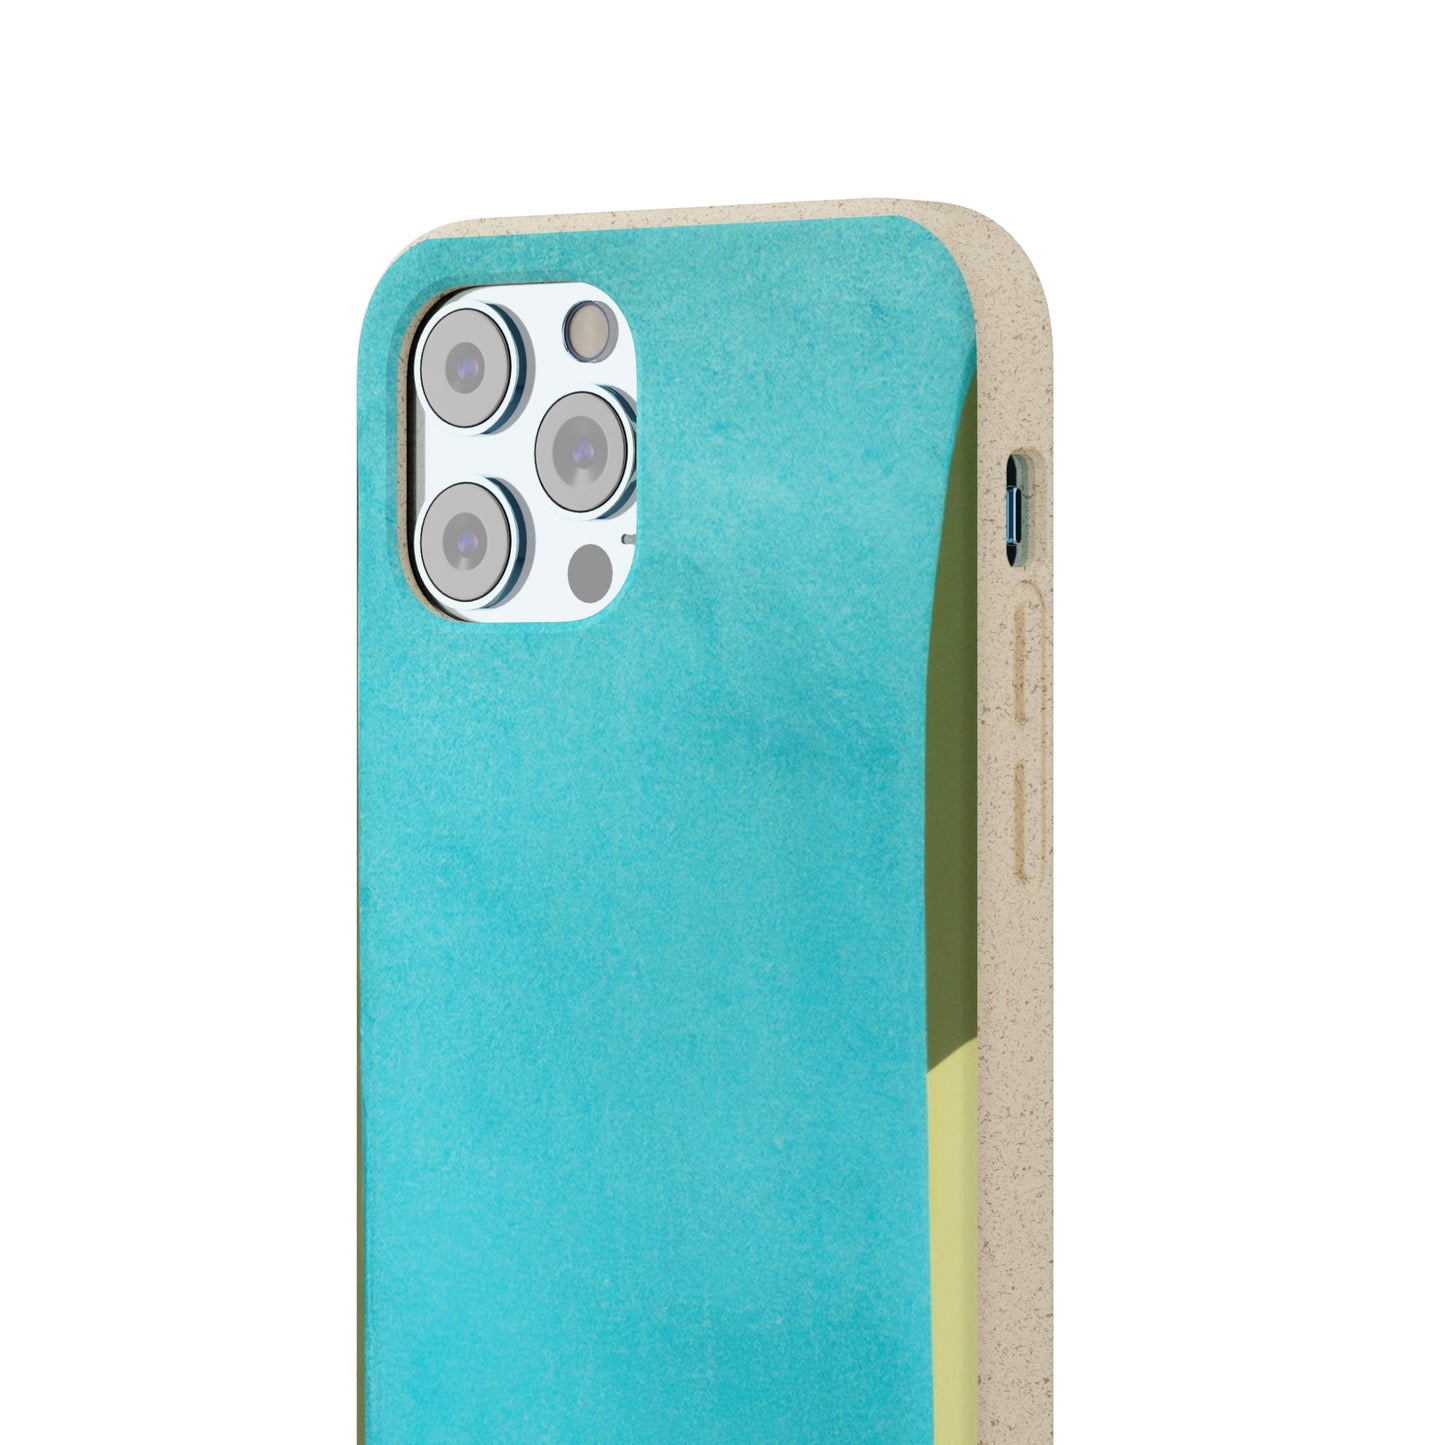 "The Urban Art Canvas: Local Landscape Reimagined" - Bam Boo! Lifestyle Eco-friendly Cases